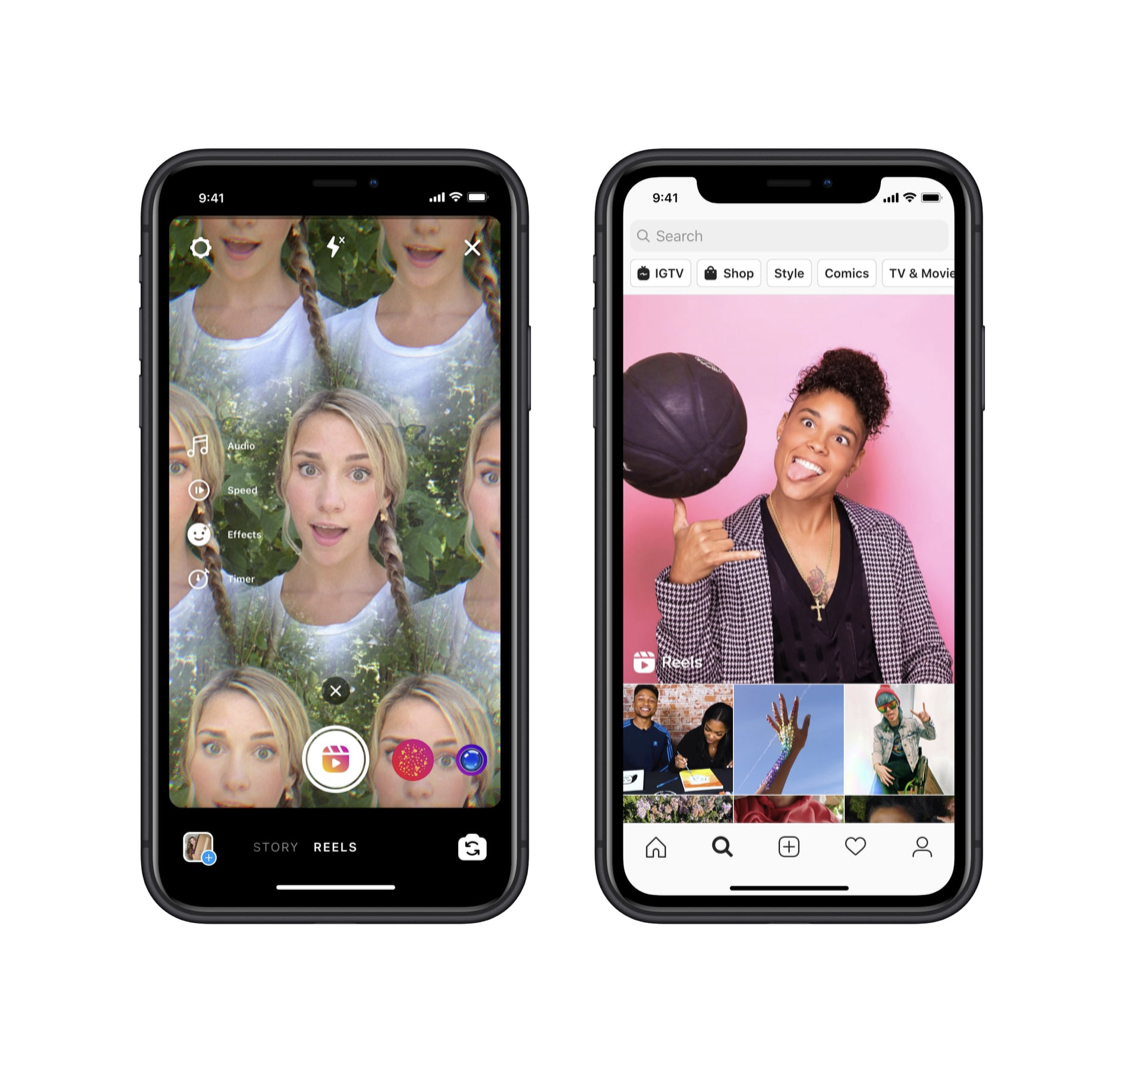 Instagram introduces 'Reels' to its users amid talk of a possible TikTok ban in the US 7